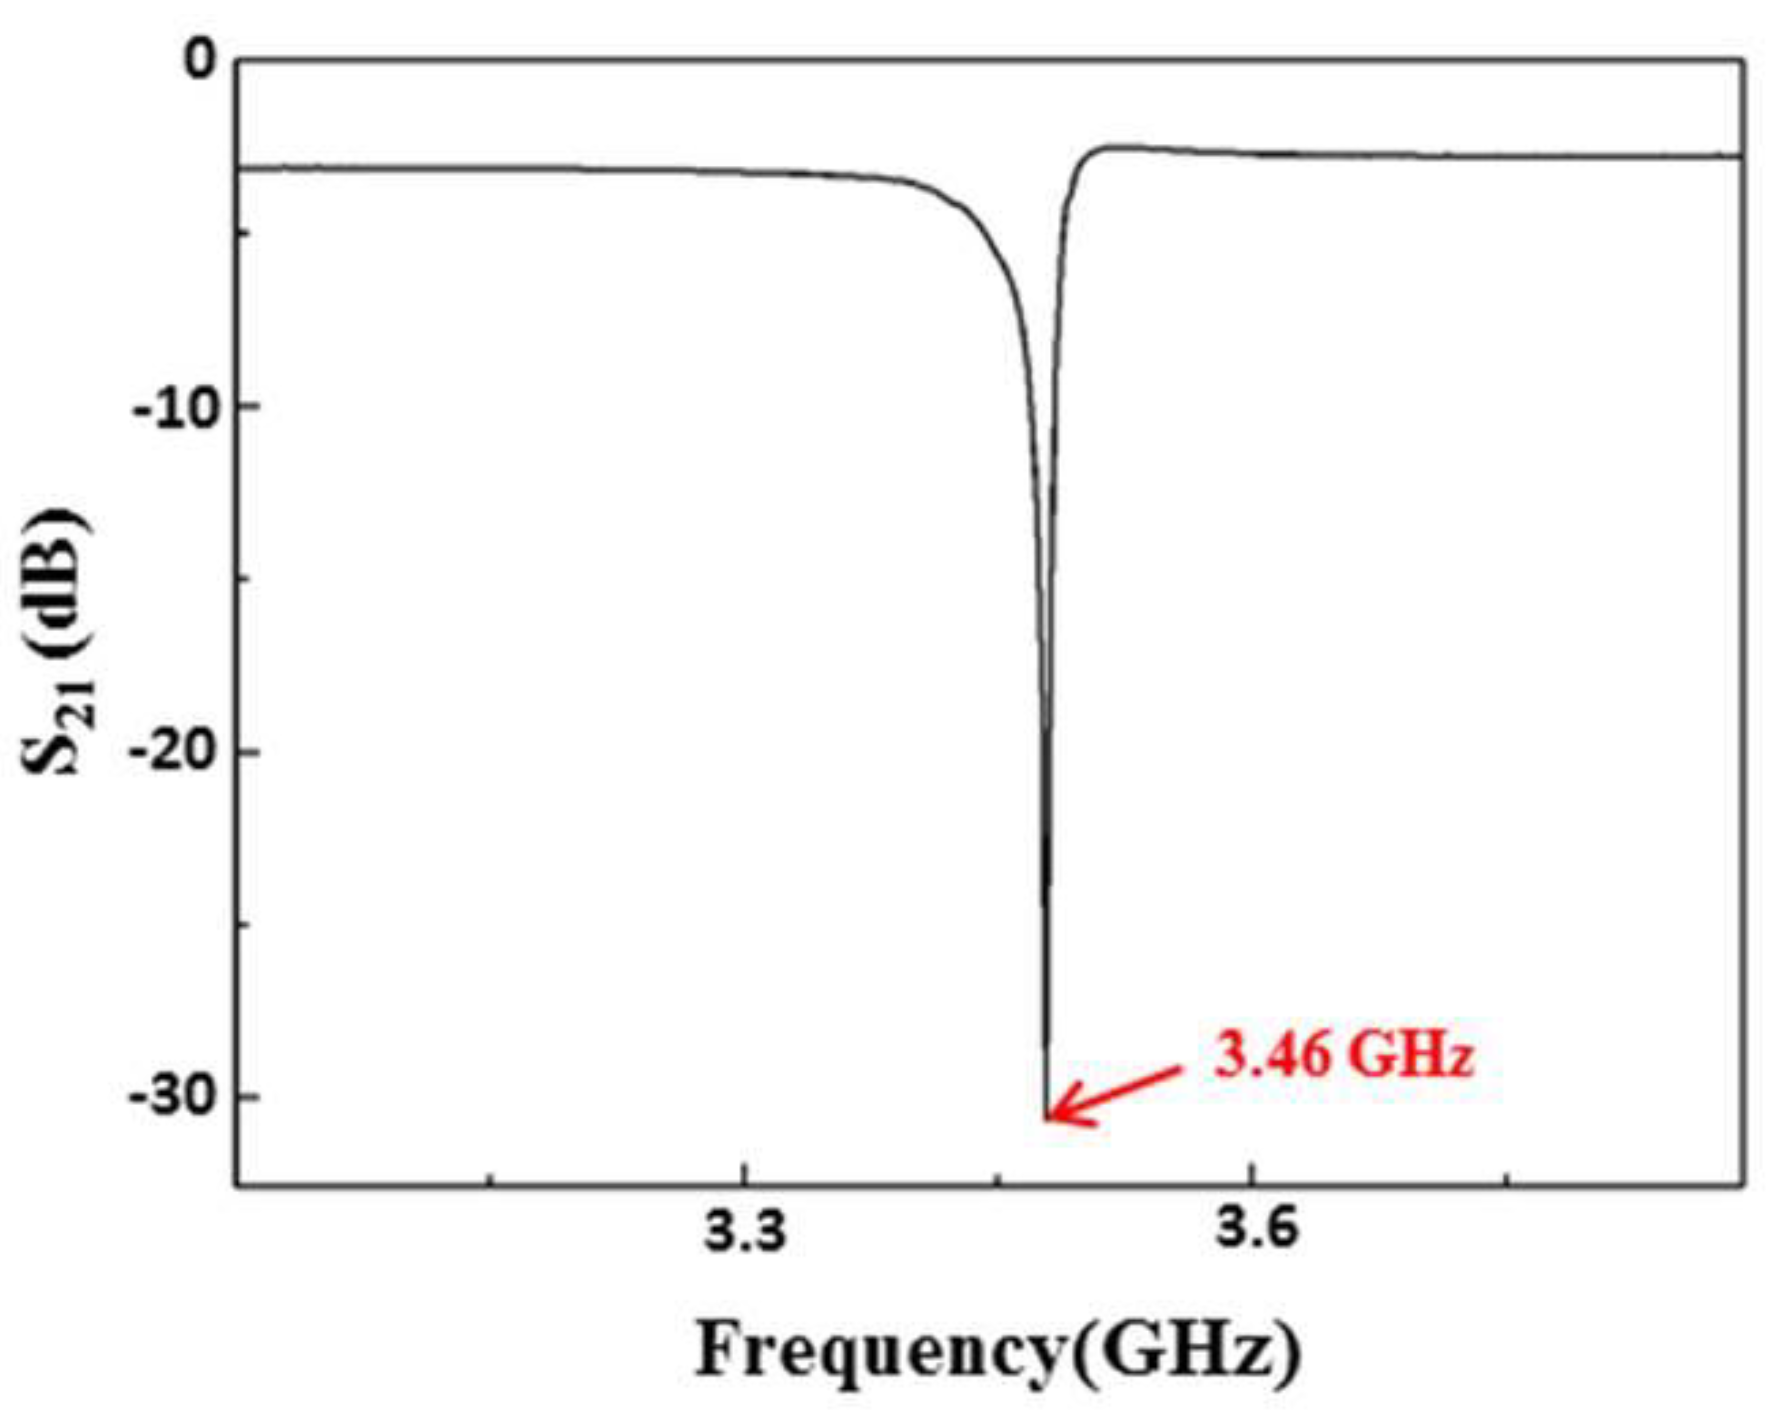 The frequency response S11 of the fabricated SMR resonator.